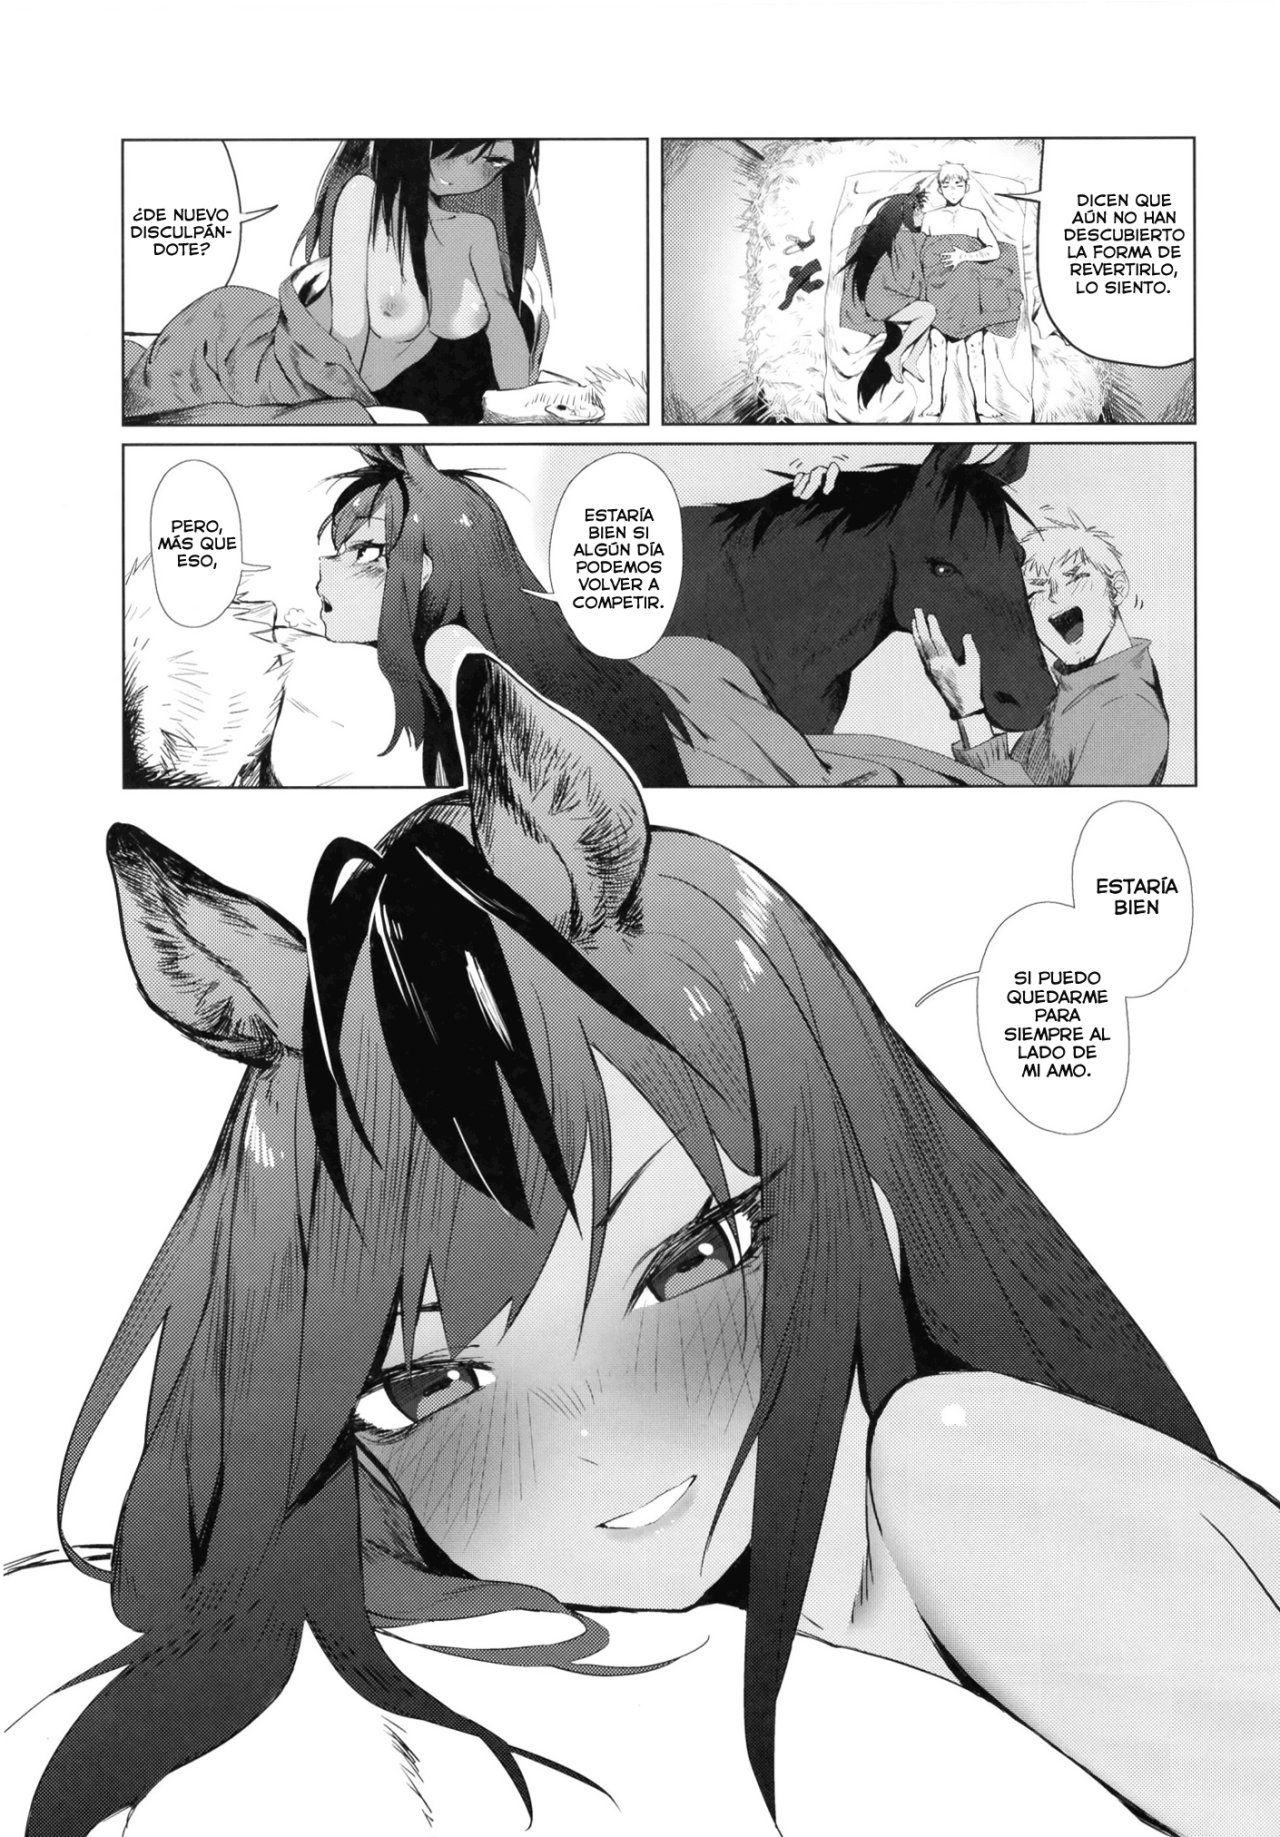 Thoroughbred Early Days (Kemono Friends) - 15